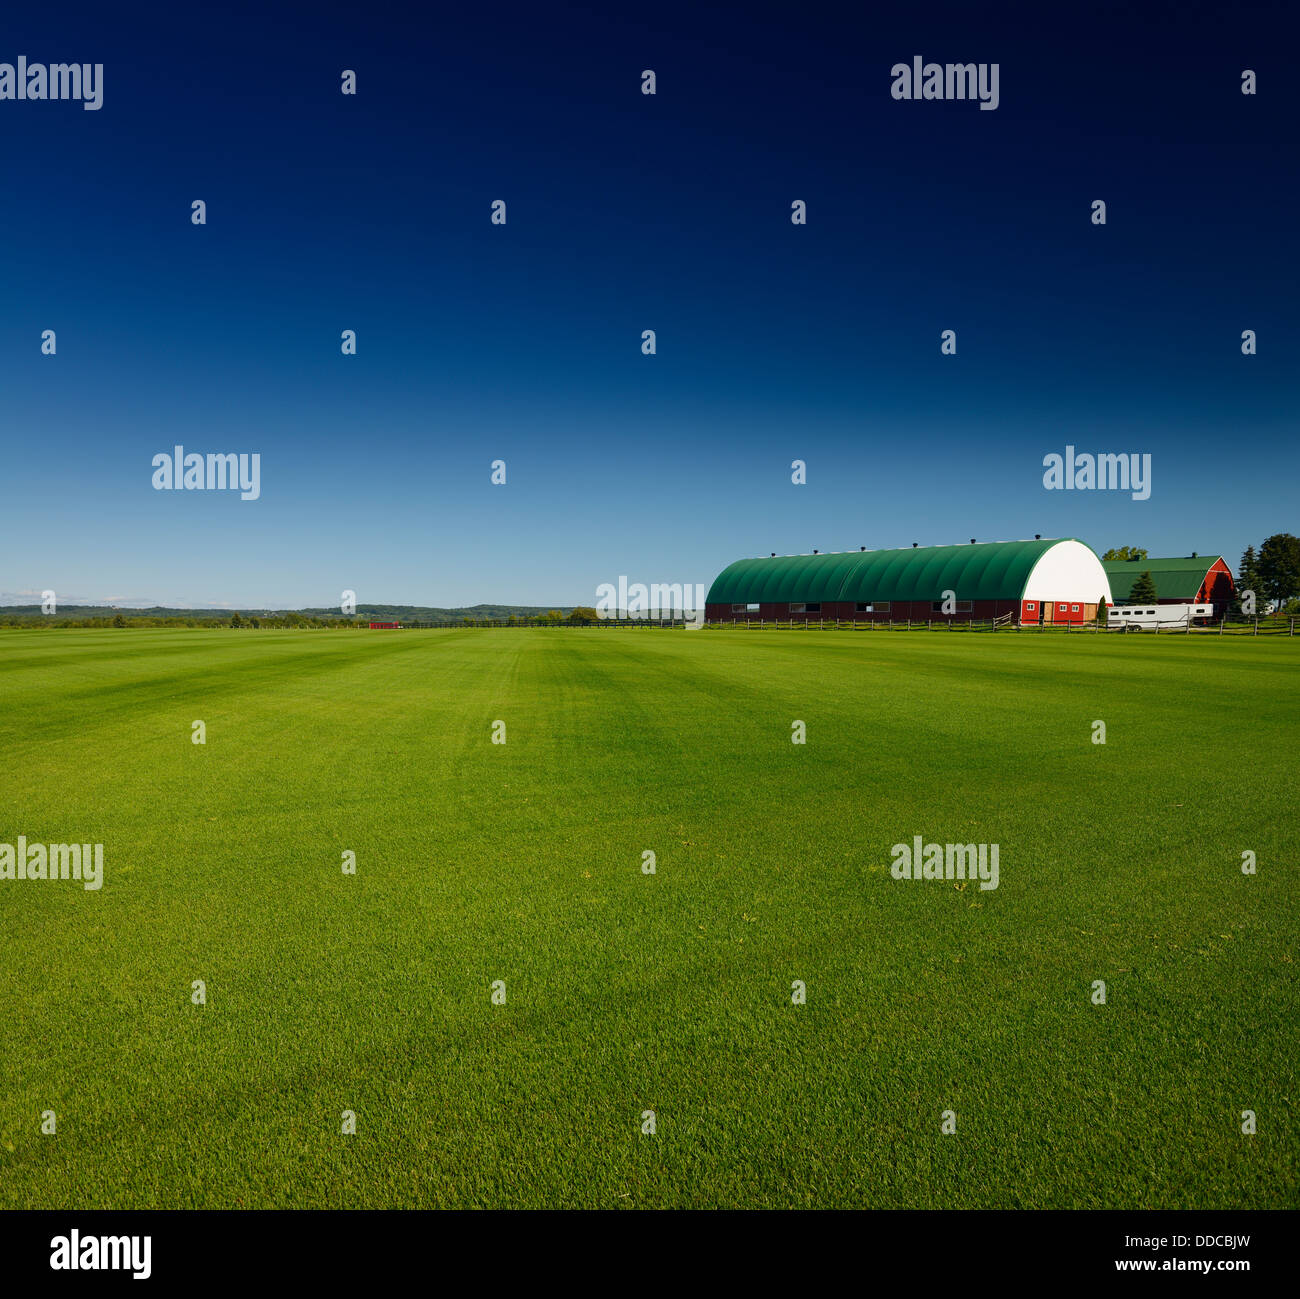 Sod farm field of grass under dark blue sky with large barns in Ontario Canada Stock Photo